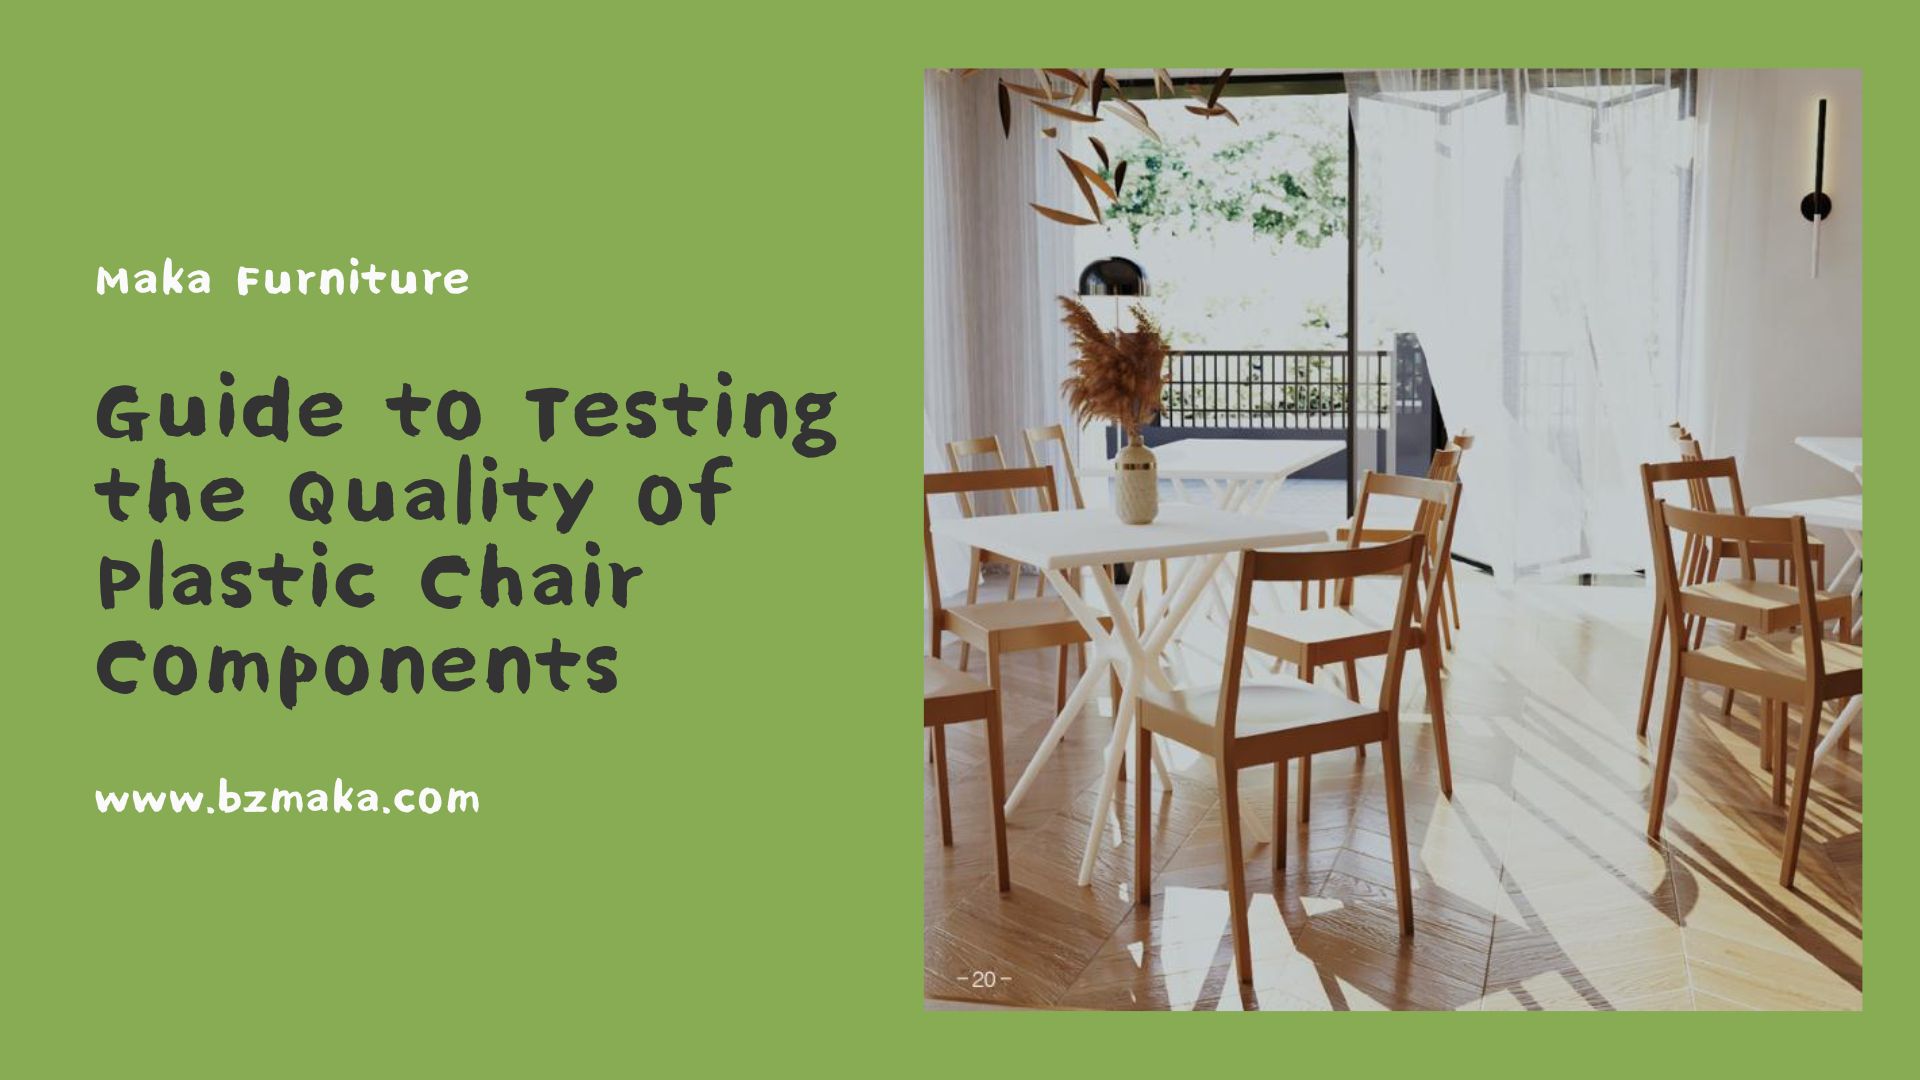 Guide to Testing the Quality of Plastic Chair Components